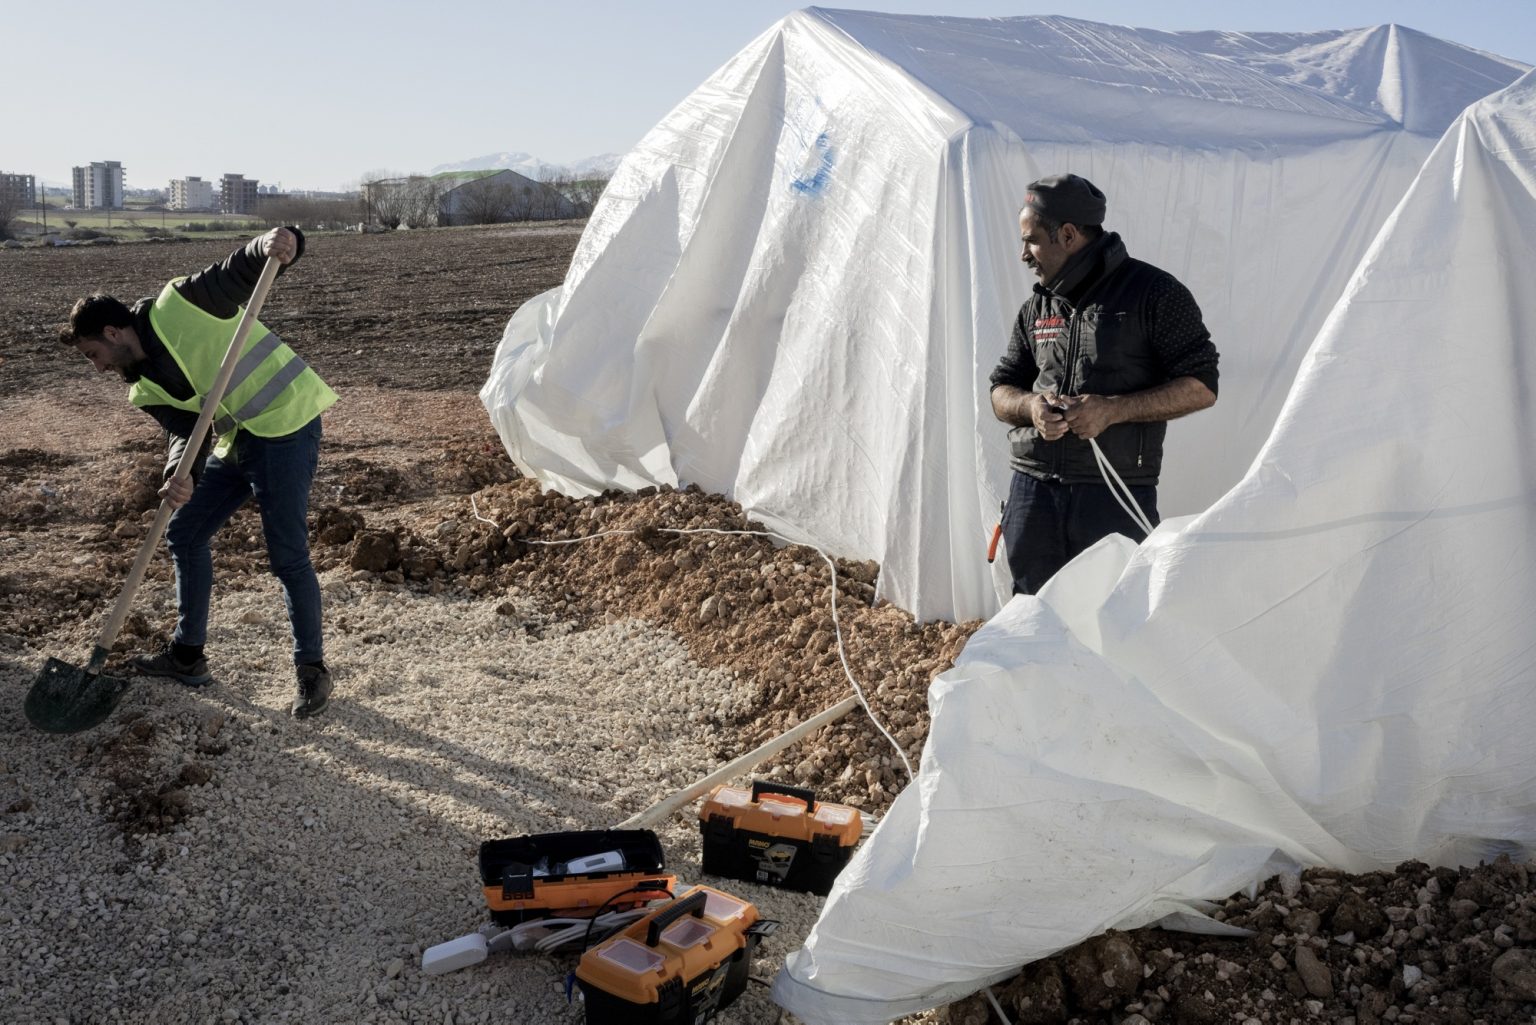 Adiyaman, Turkey, February 2023 - The aftermath of the earthquake that hit southern Turkey and northern Syria. Volunteers work to set up an unofficial tent camp not recognized by AFAD, the government's disaster agency, in the city of Adiyaman.><
Adiyaman, Turchia, febbraio 2023  Le conseguenze del terremoto che ha colpito la Turchia del Sud e la Siria del nord.